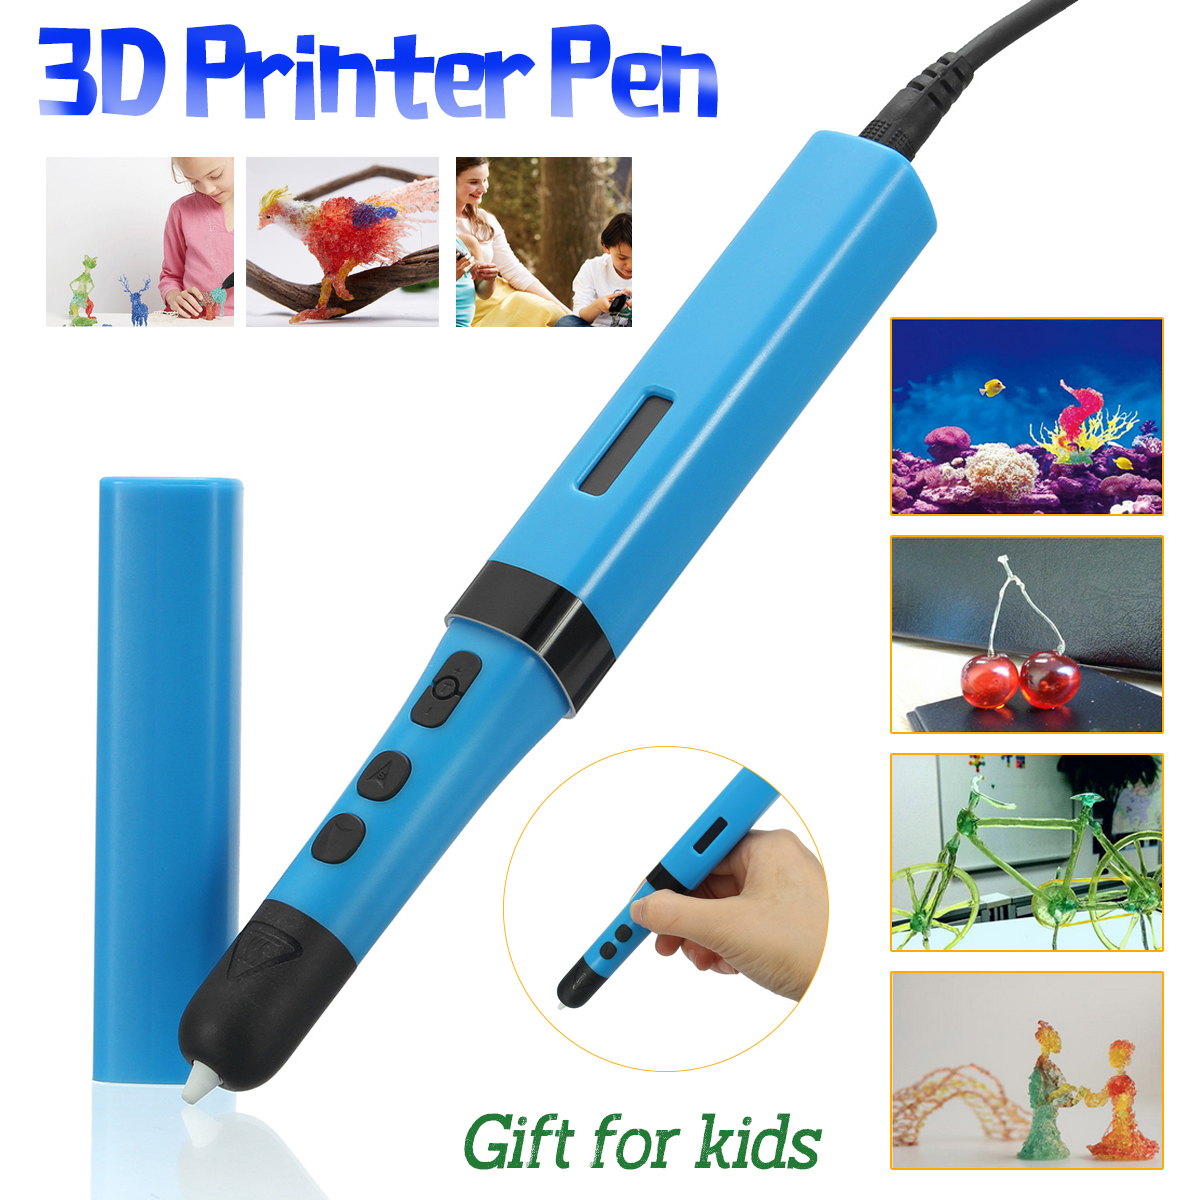 175mm-Low-Temperature-3D-Printer-Drawing-Pen-1520173mm-Size-Support-PLAABSHPS-1221720